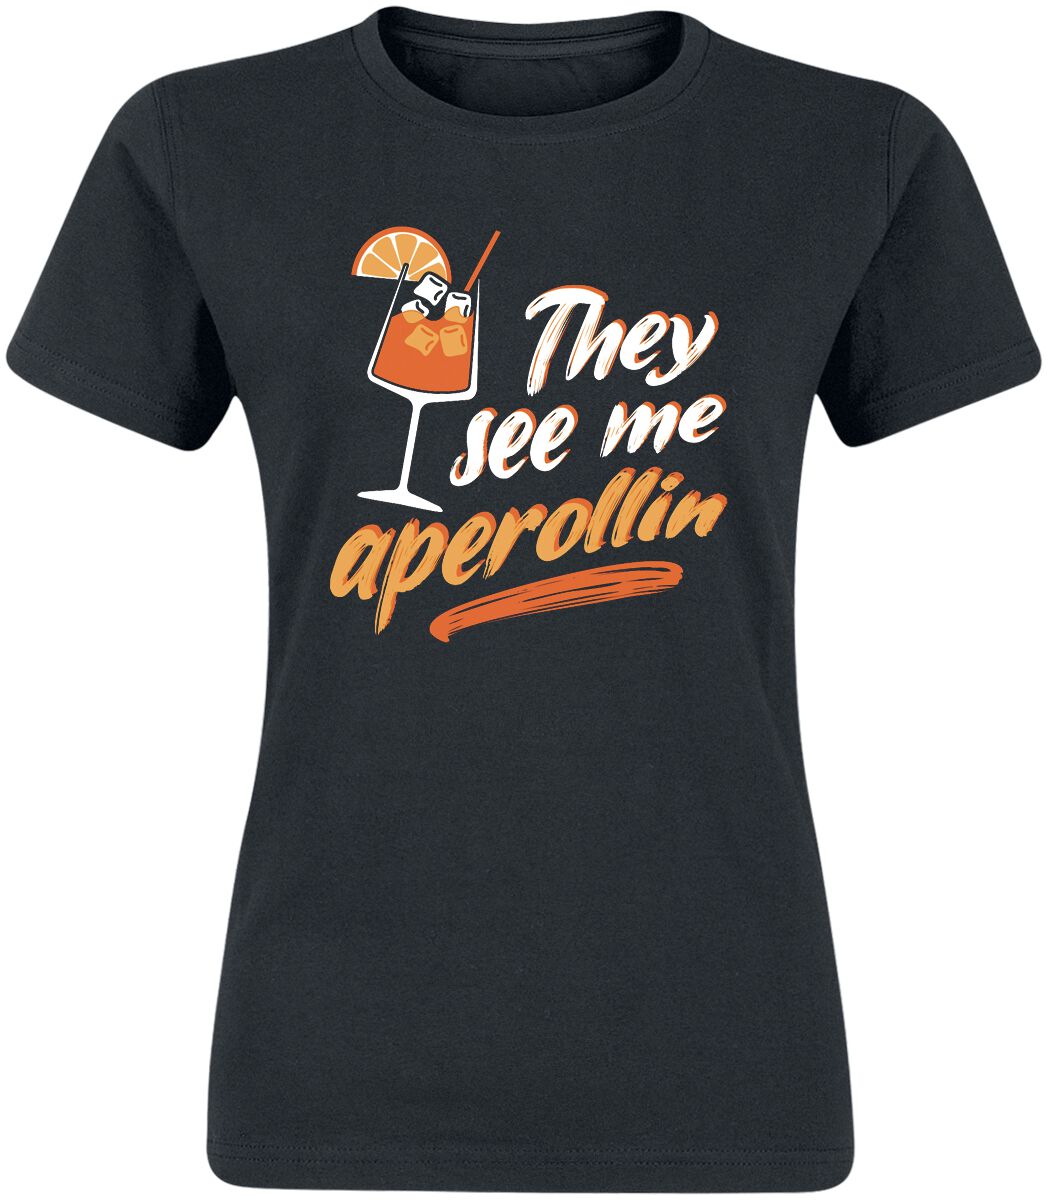 Alcohol & Party They See Me Aperollin T-Shirt black